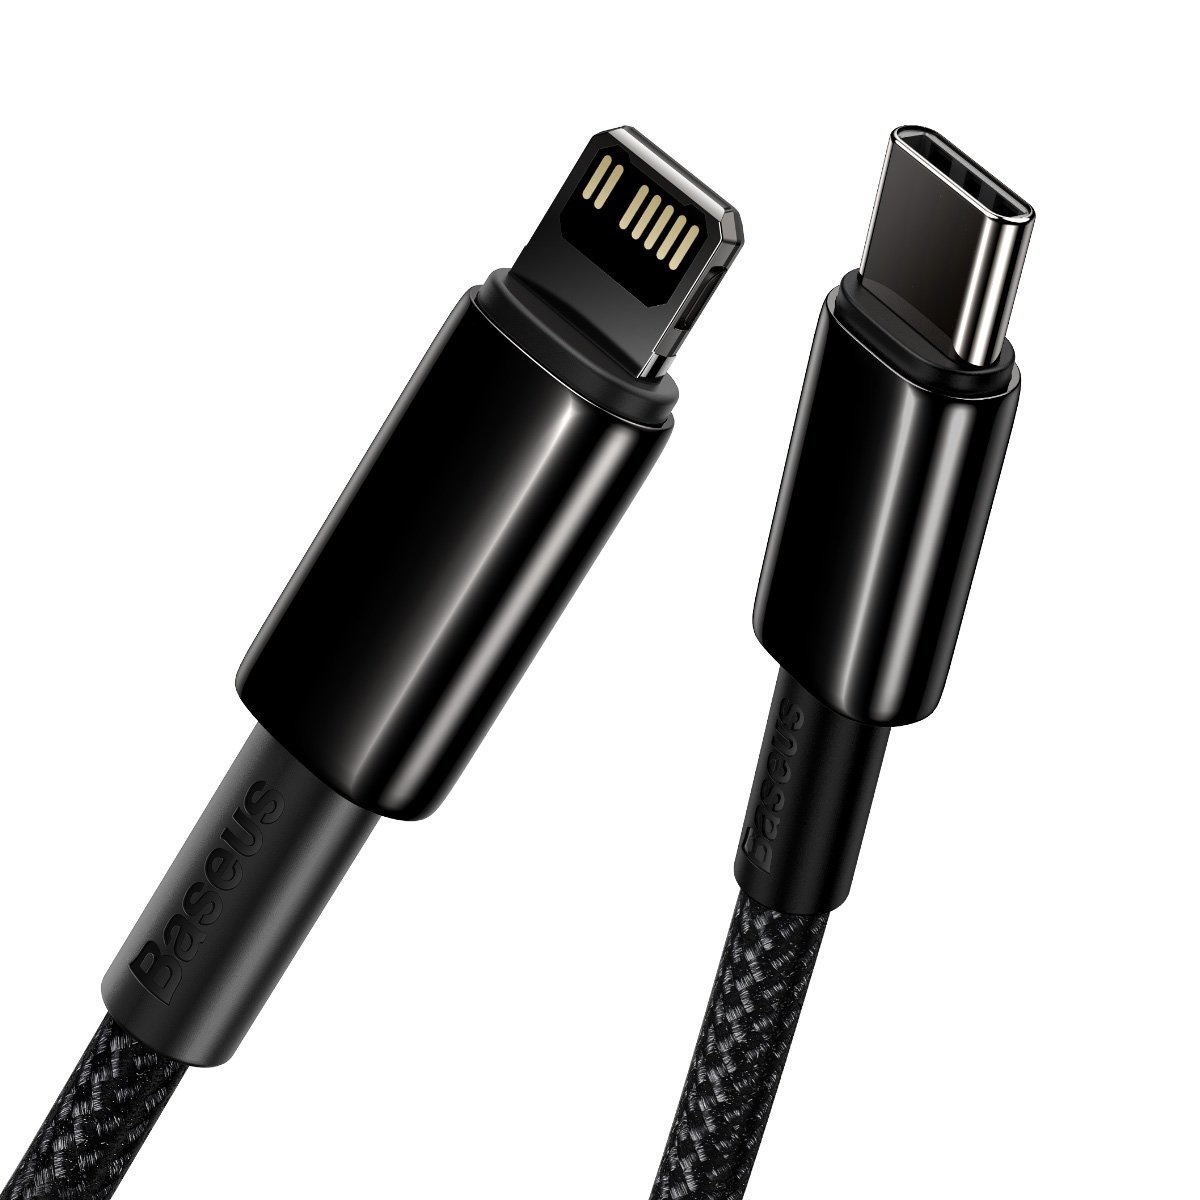 Baseus Tungsten Gold Cable Type-C to Lightning PD 20W 1m (black)